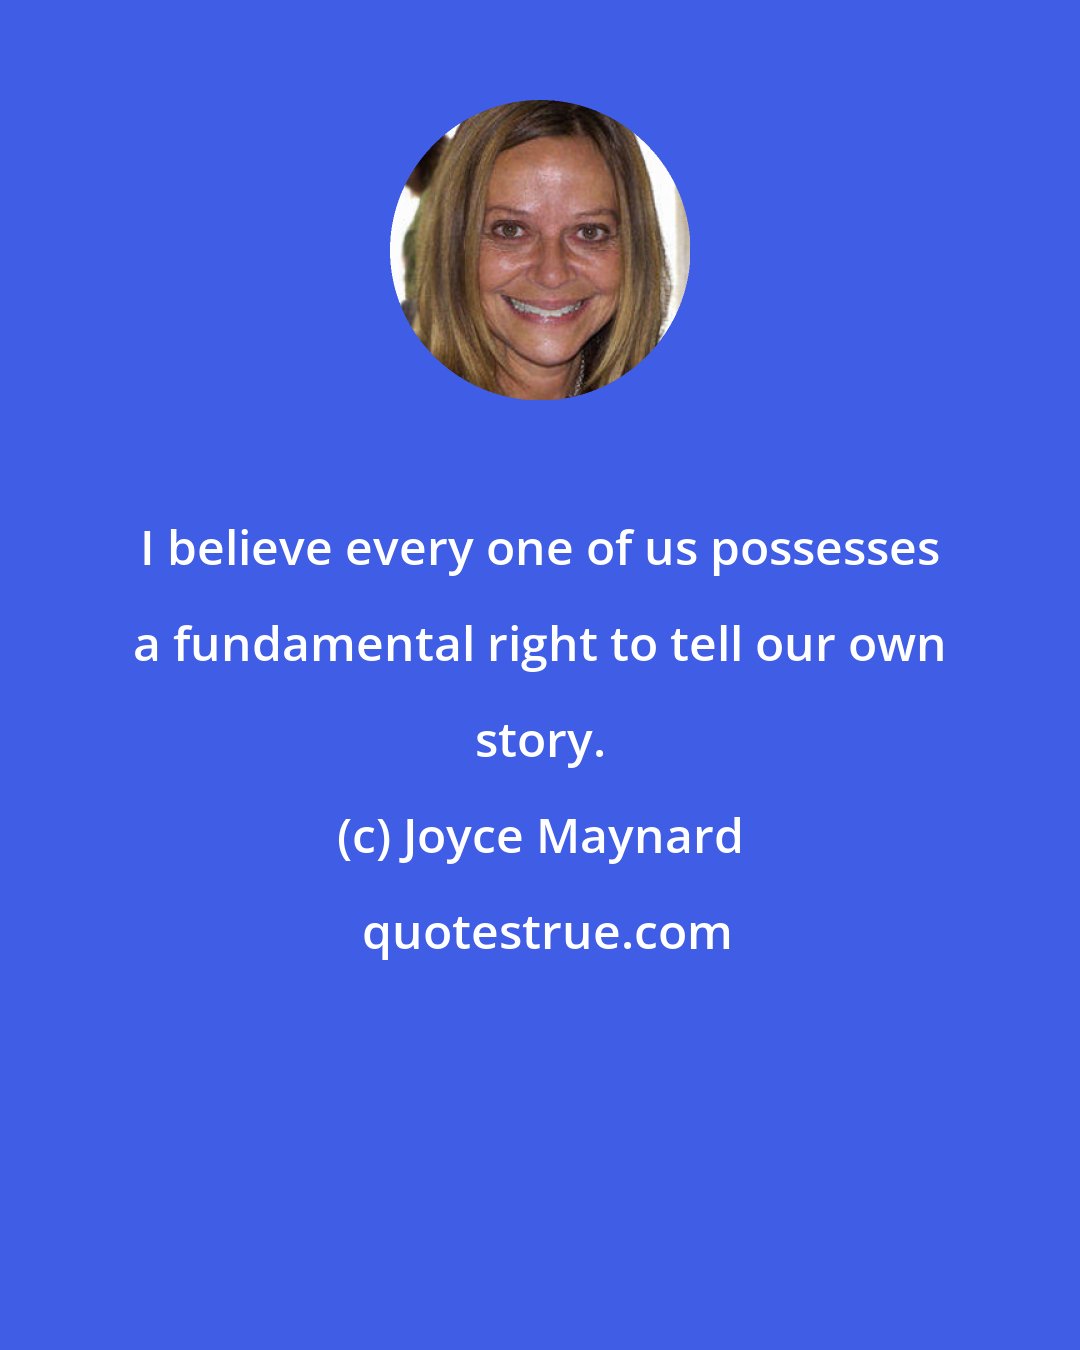 Joyce Maynard: I believe every one of us possesses a fundamental right to tell our own story.